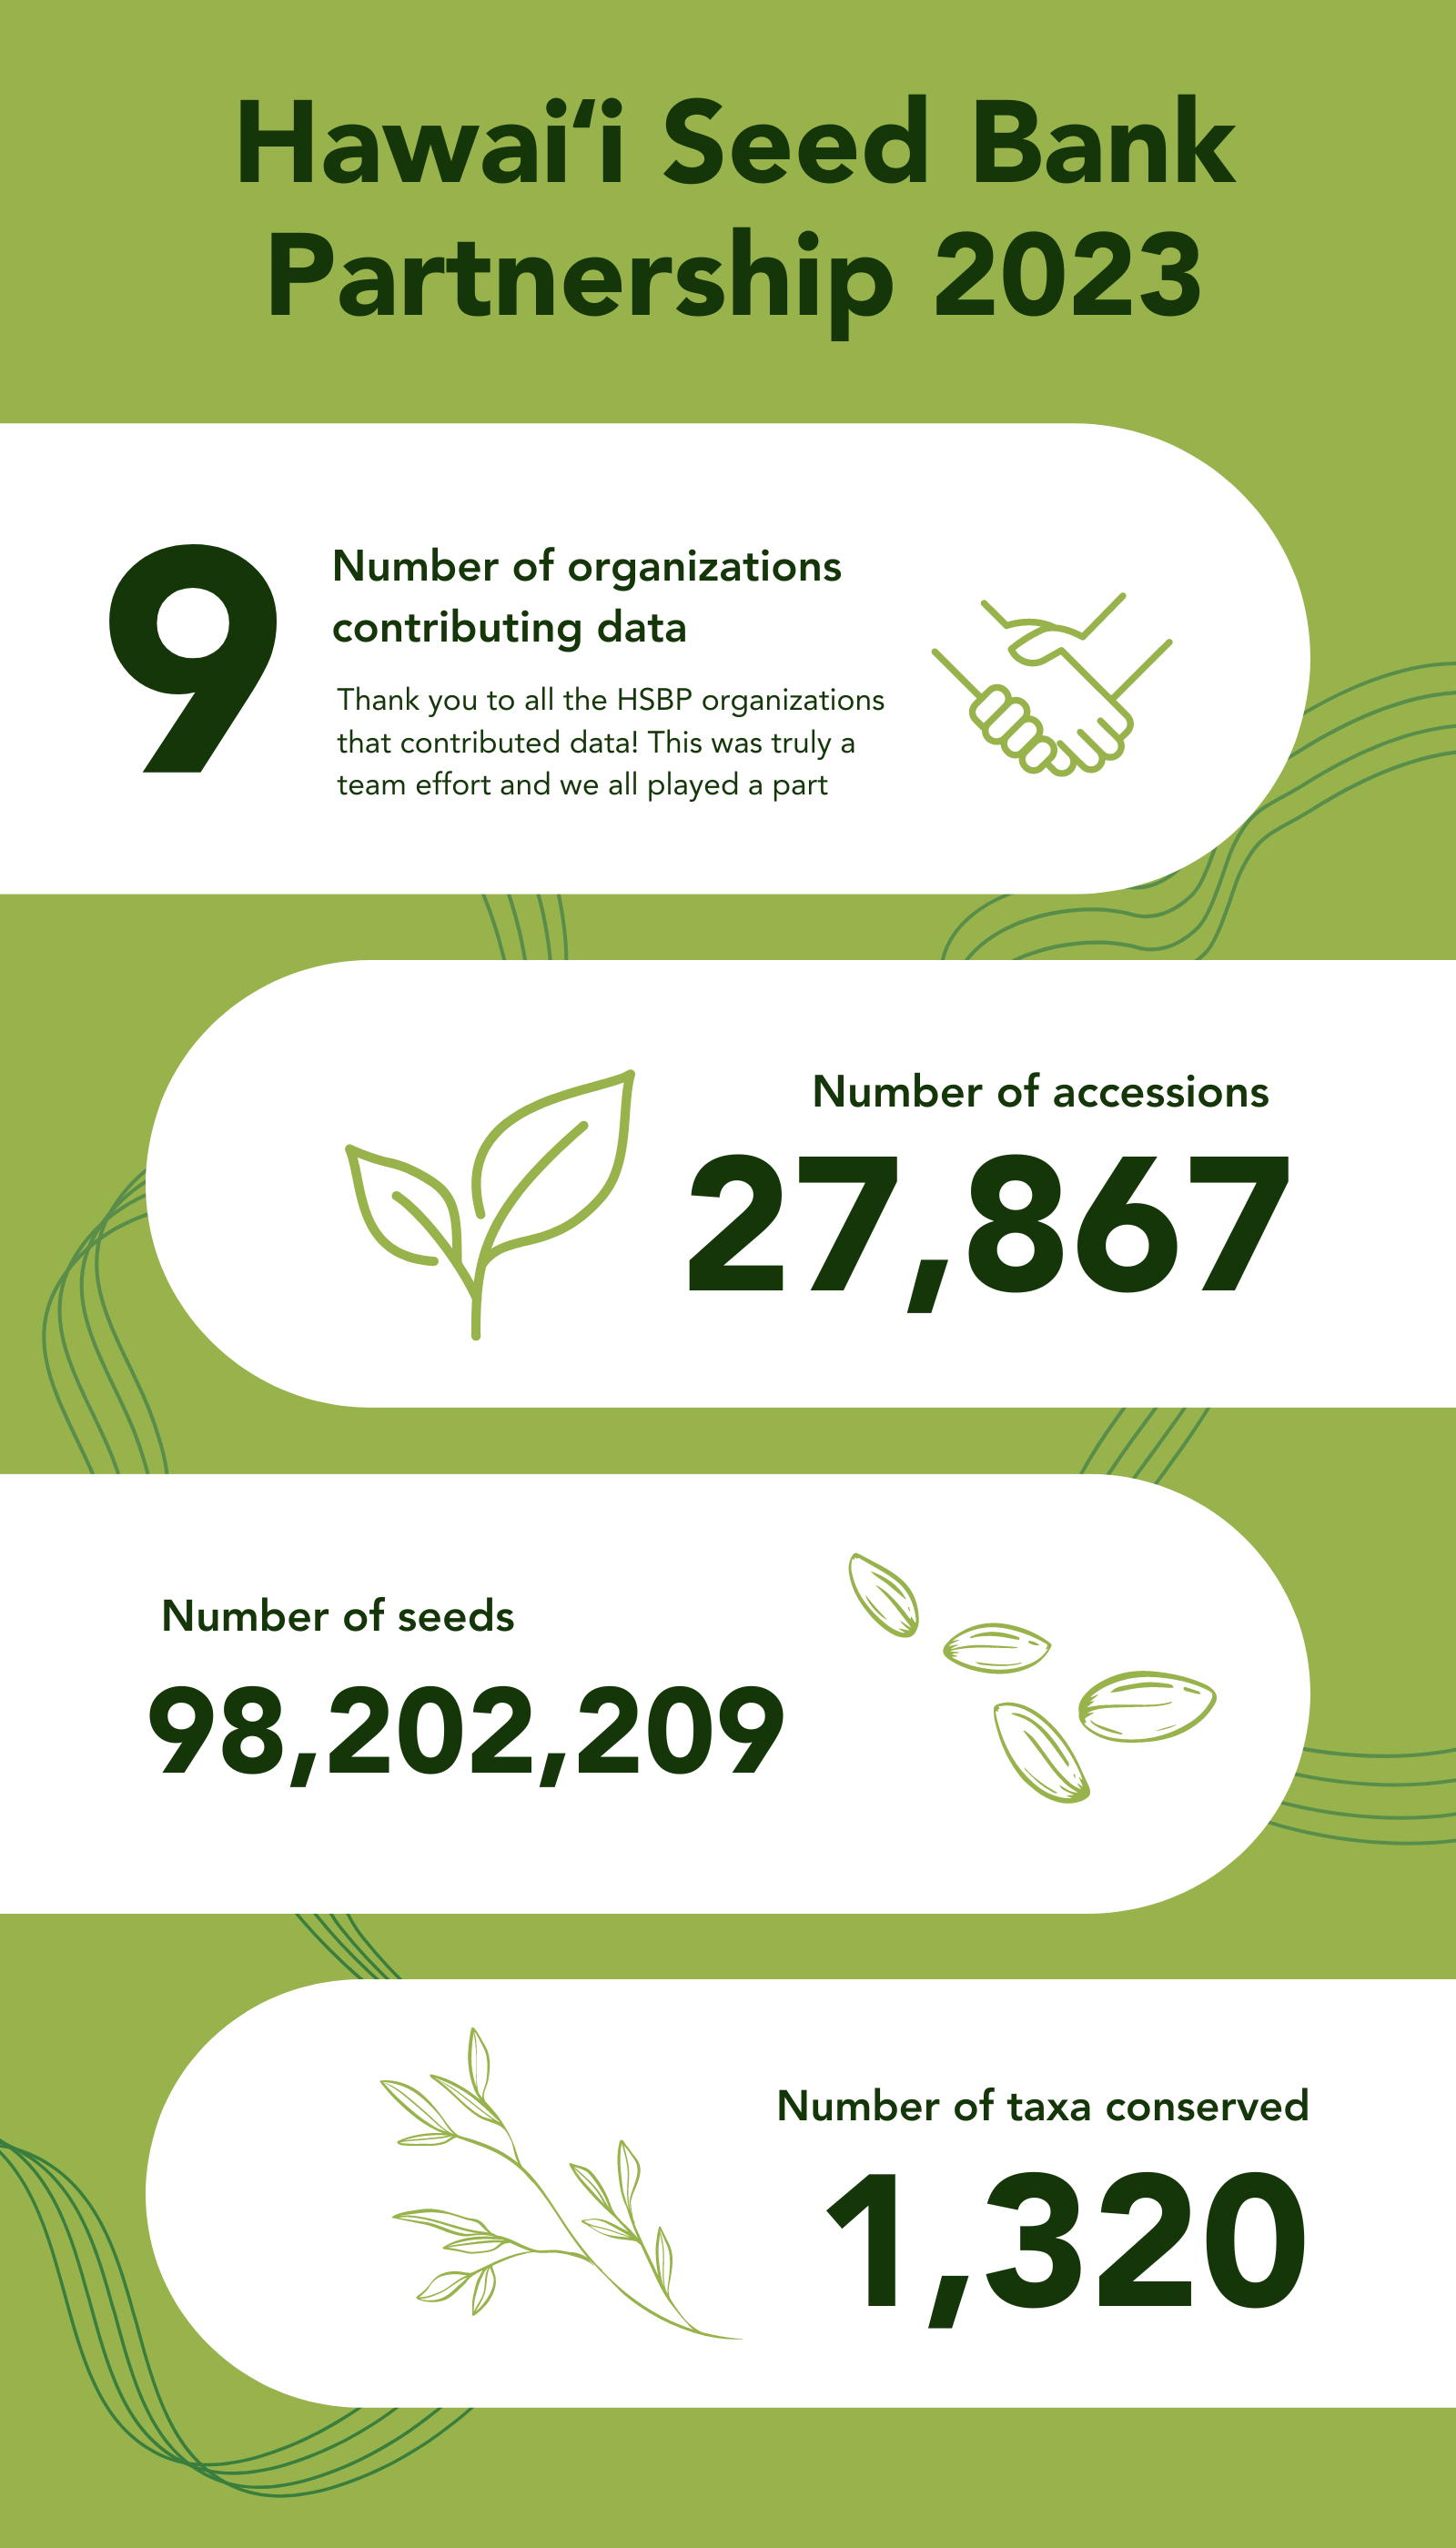 Infographic summarizing the 2023 achievements of the hawai'i seed bank partnership, highlighting the number of contributing organizations, total seeds conserved, and plant taxa preserved.